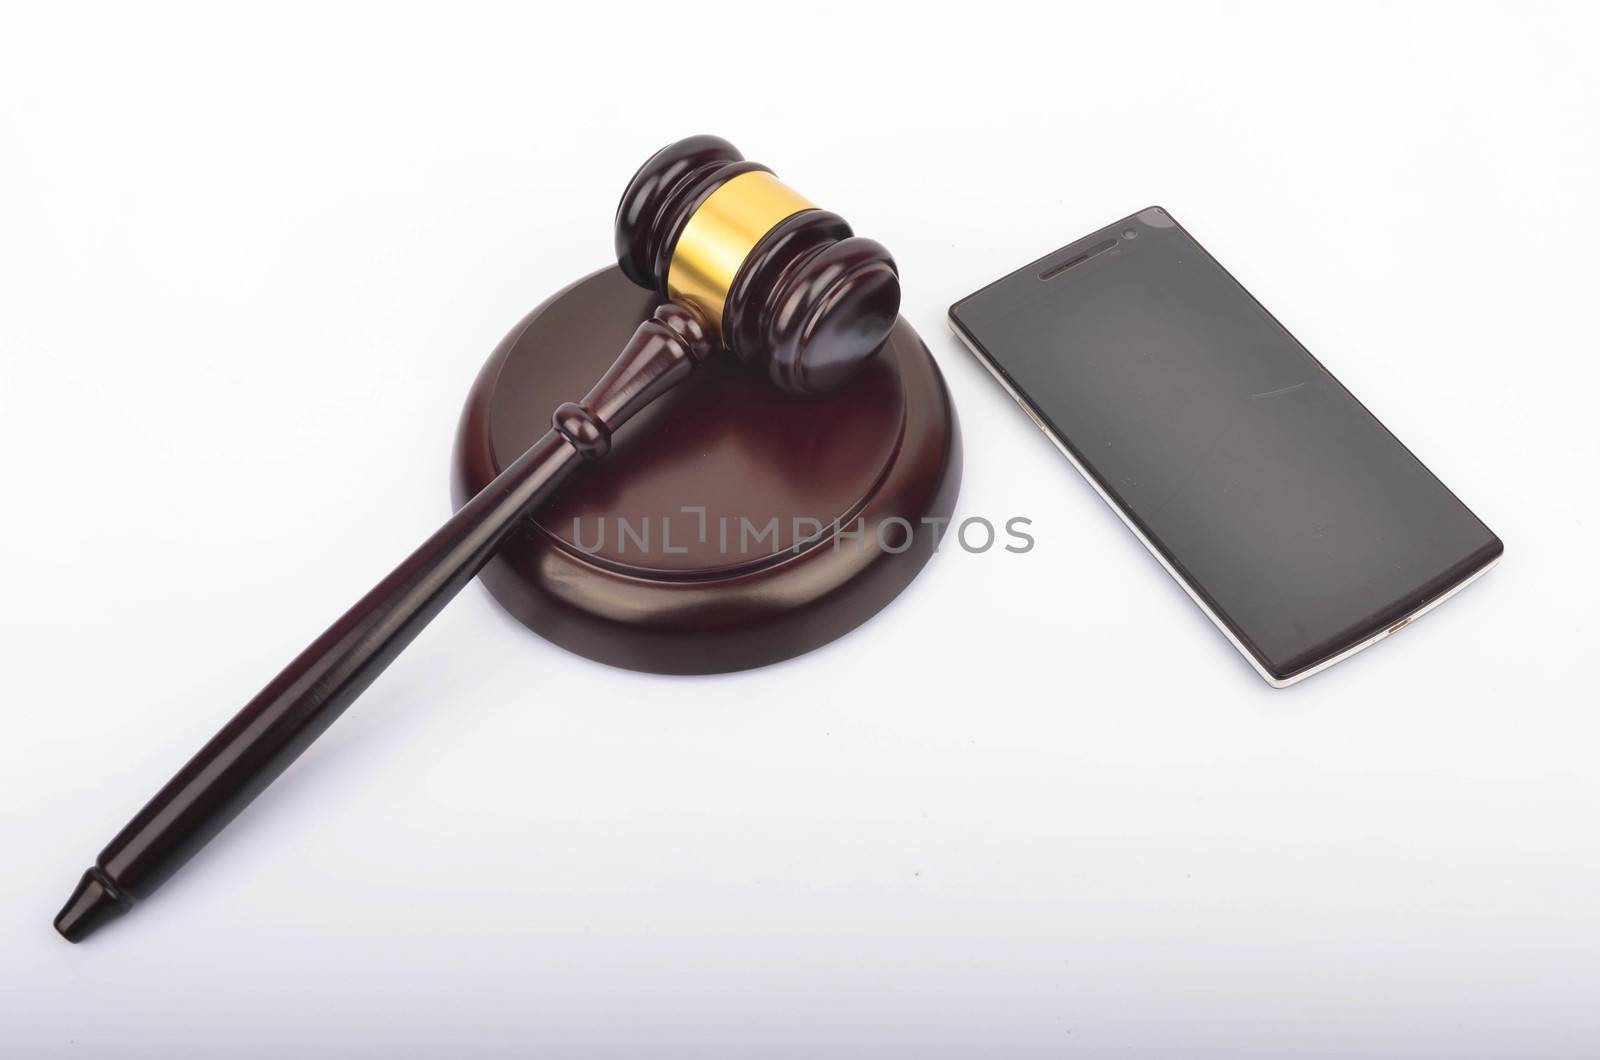 Judge hammer or gavel with smartphone on white background. Justice and law concept. Selective focus.